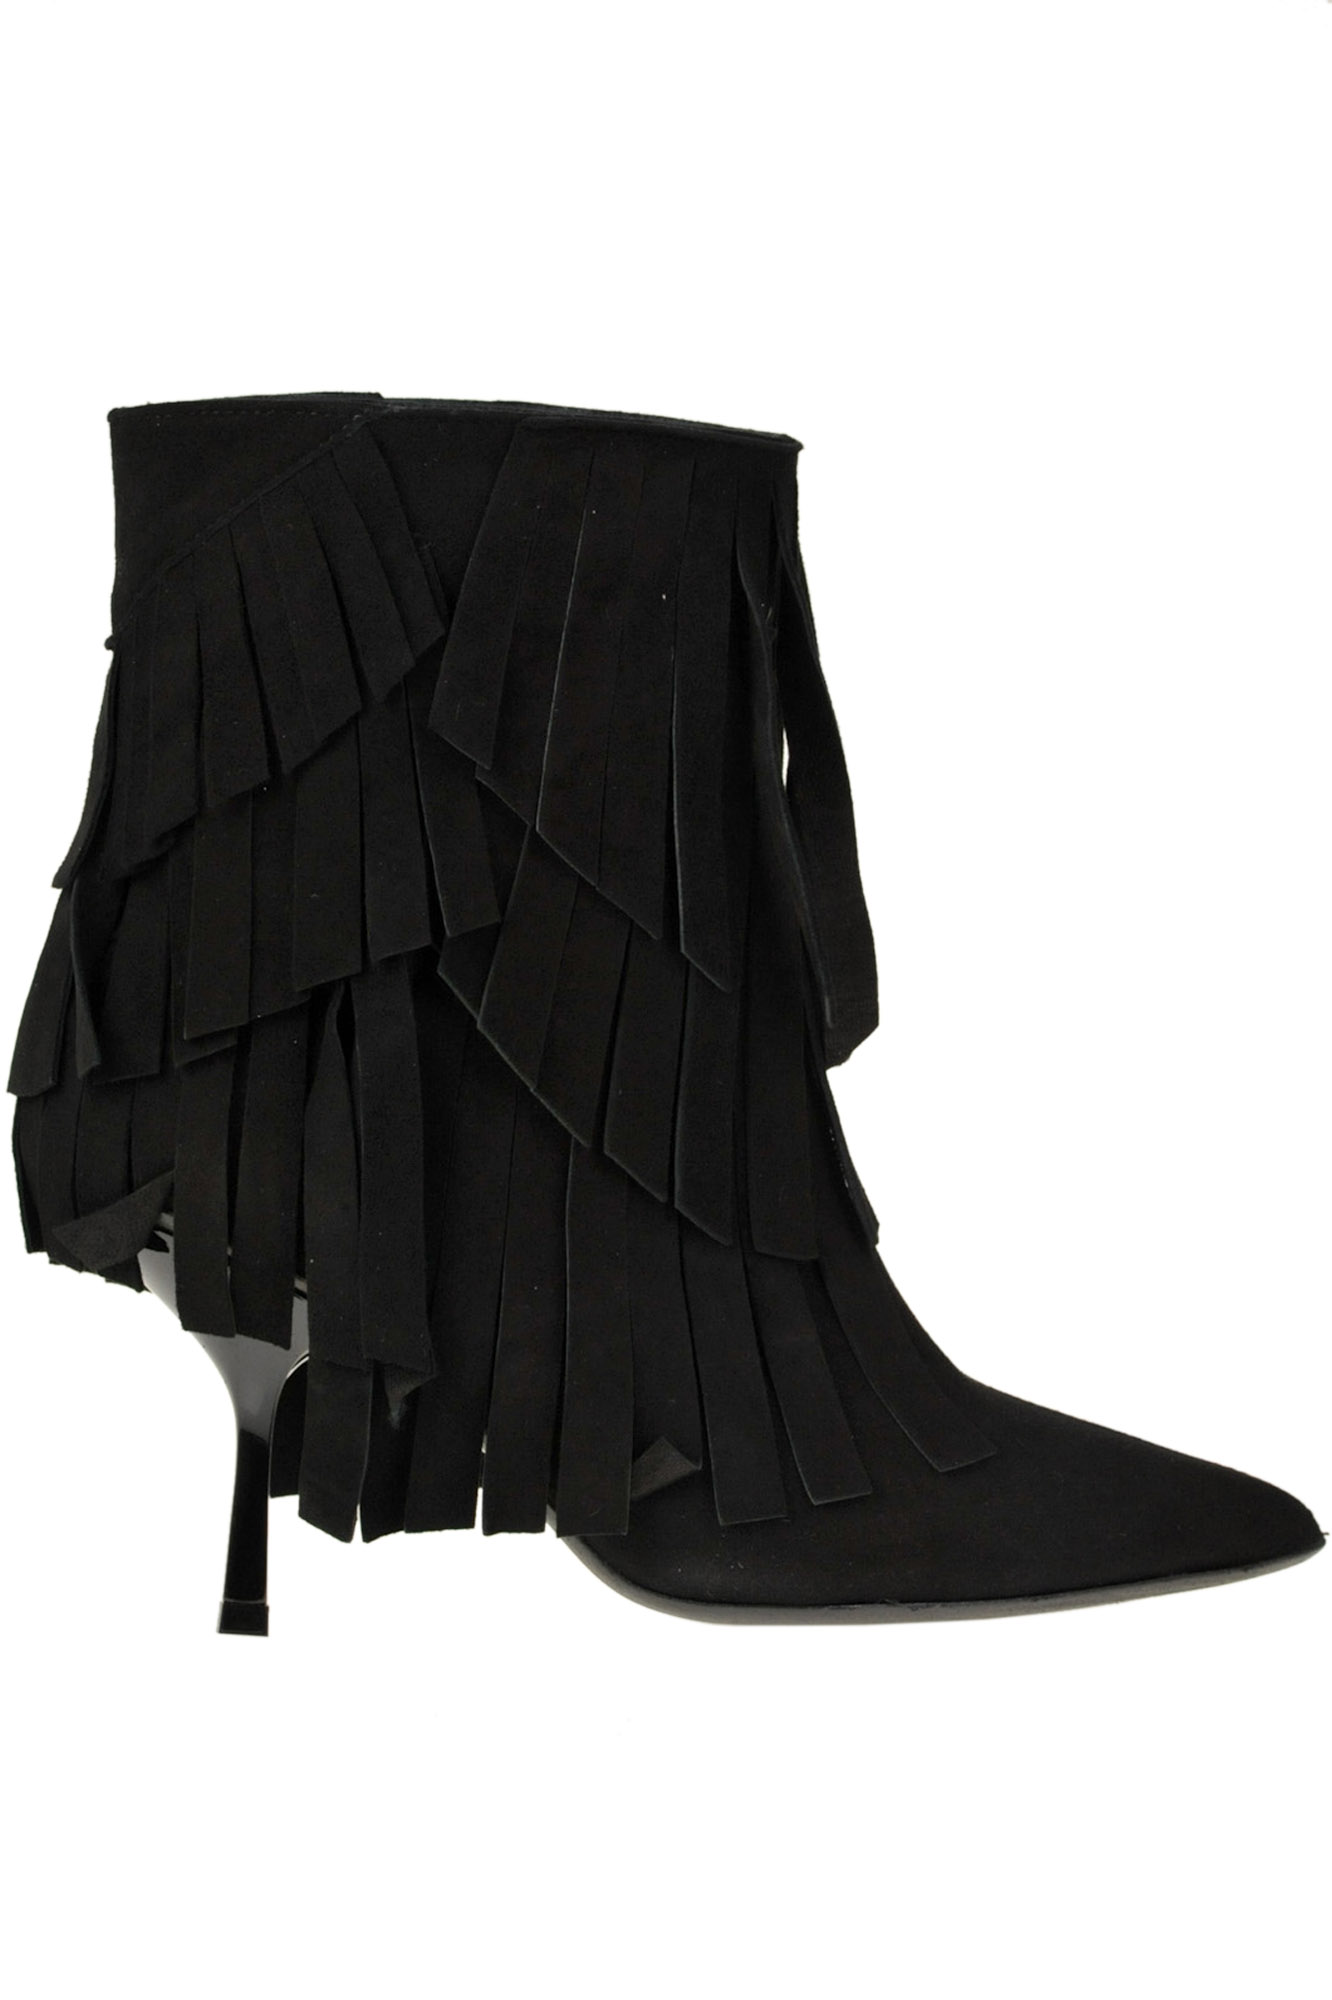 Ncub Elle Fringed Suede Ankle Boots In Black